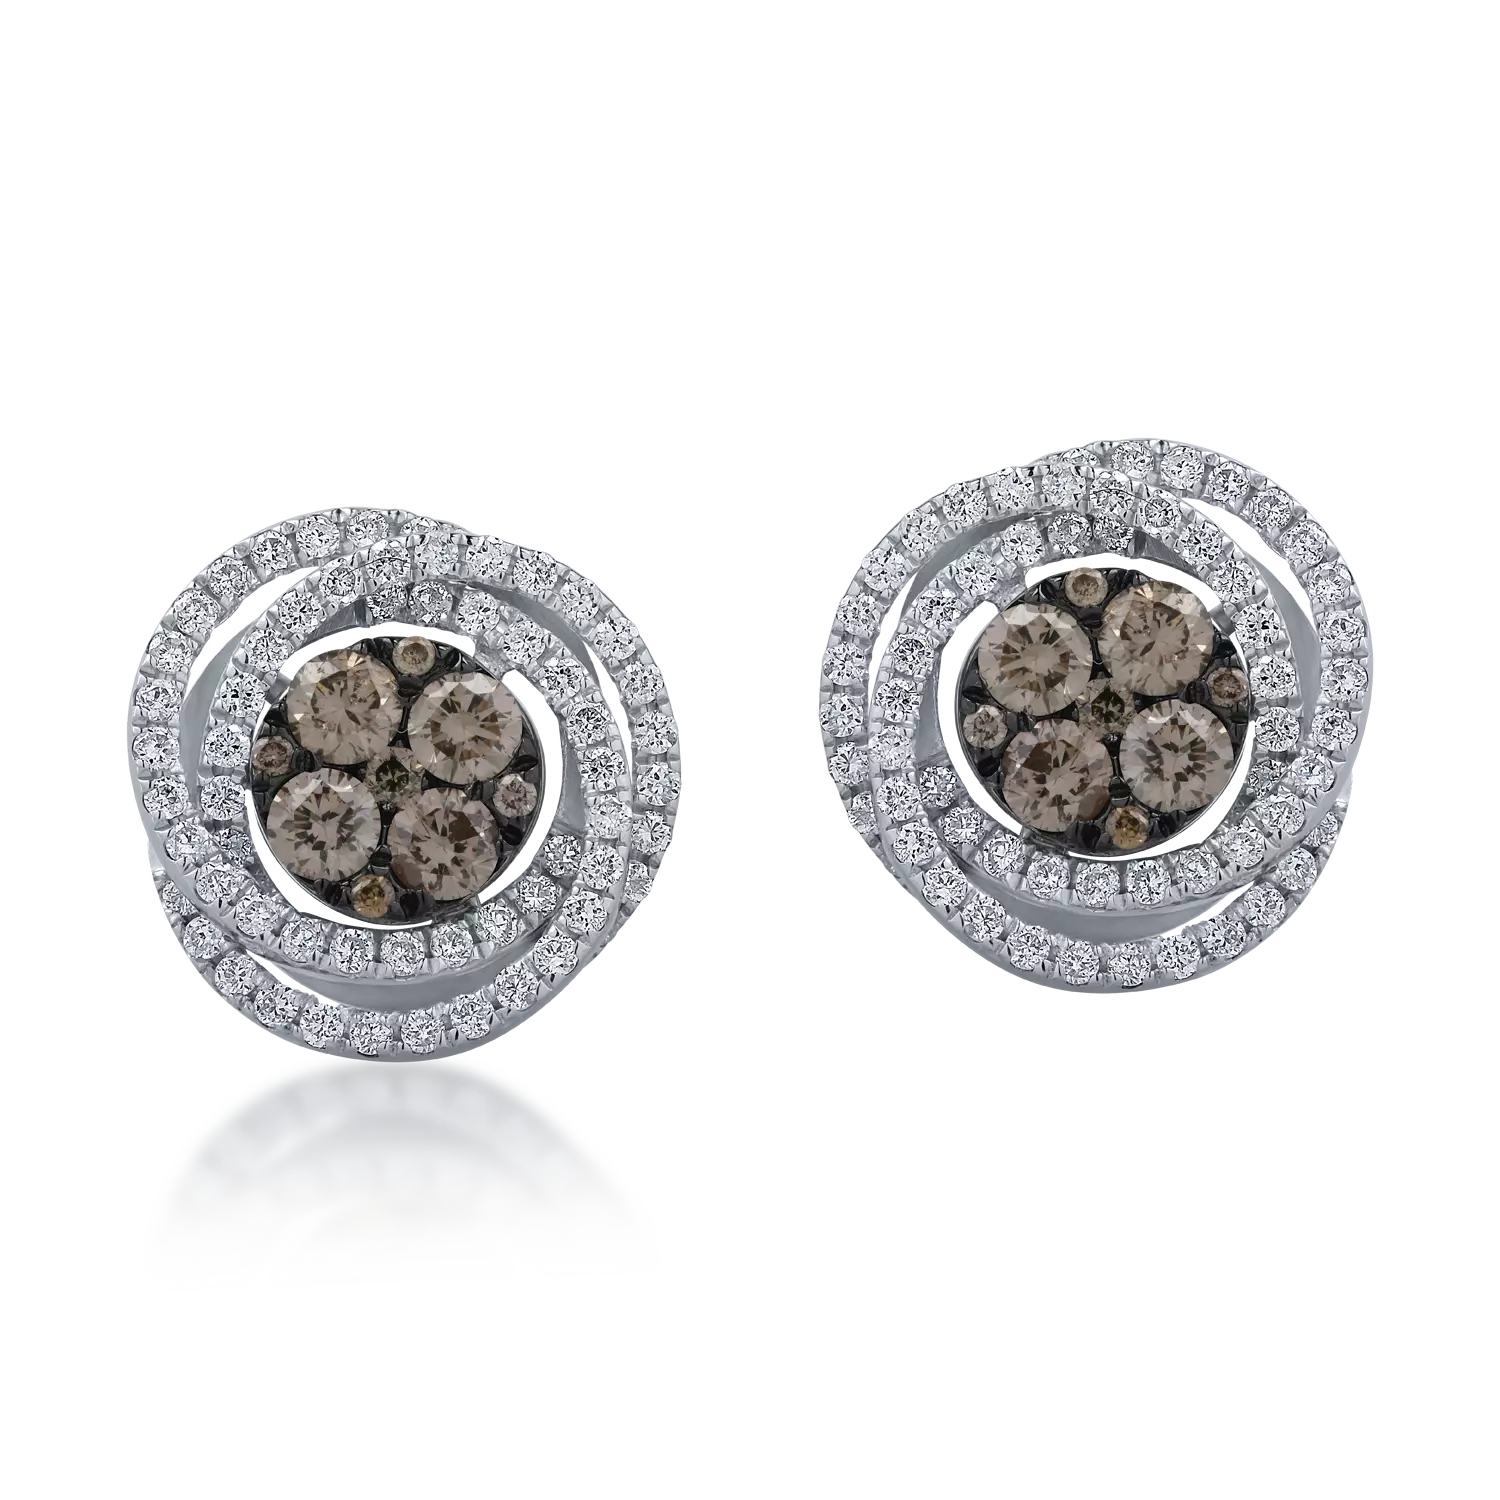 White gold round earrings with 0.7ct brown and clear diamonds